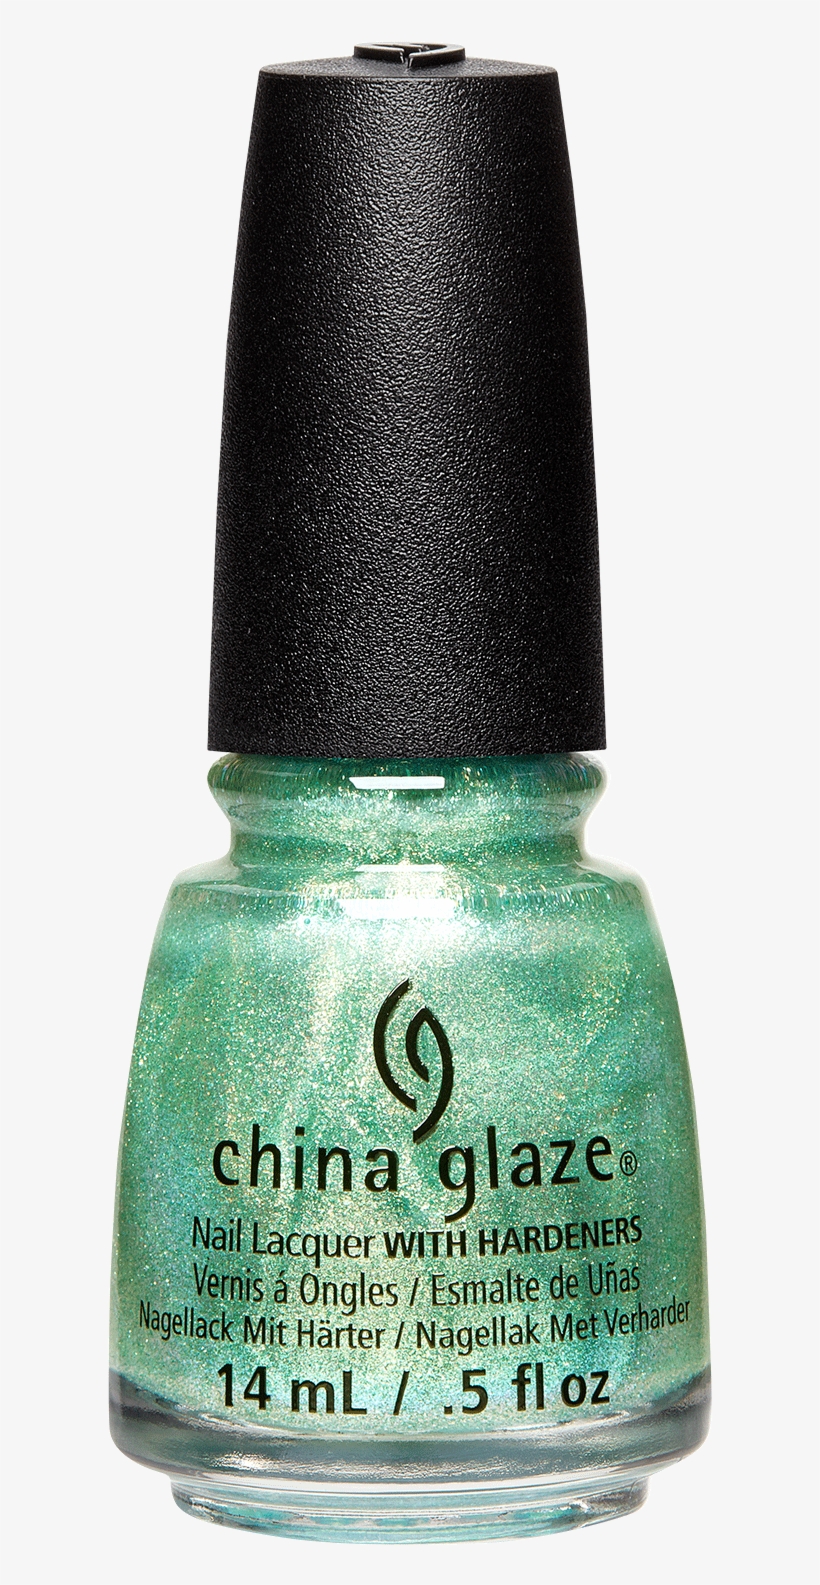 Twinkle Twinkle Little Starfish - China Glaze Seas And Greetings Holiday Nail Polish, transparent png #1147138